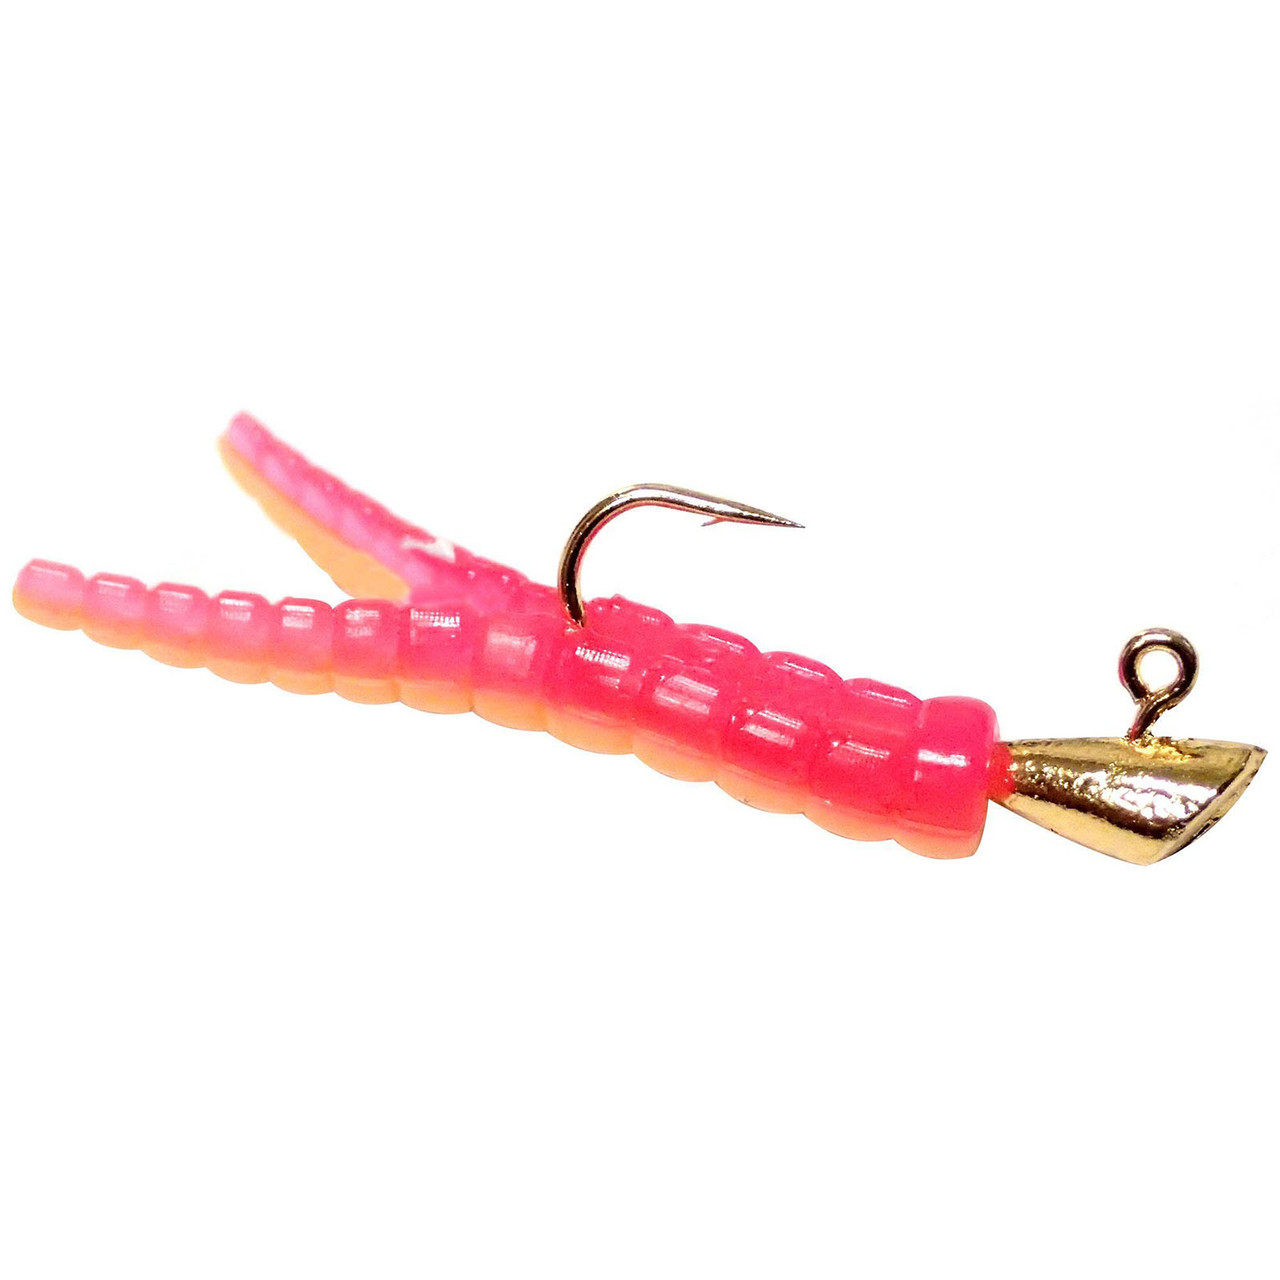 Leland's Lures Trout Magnets